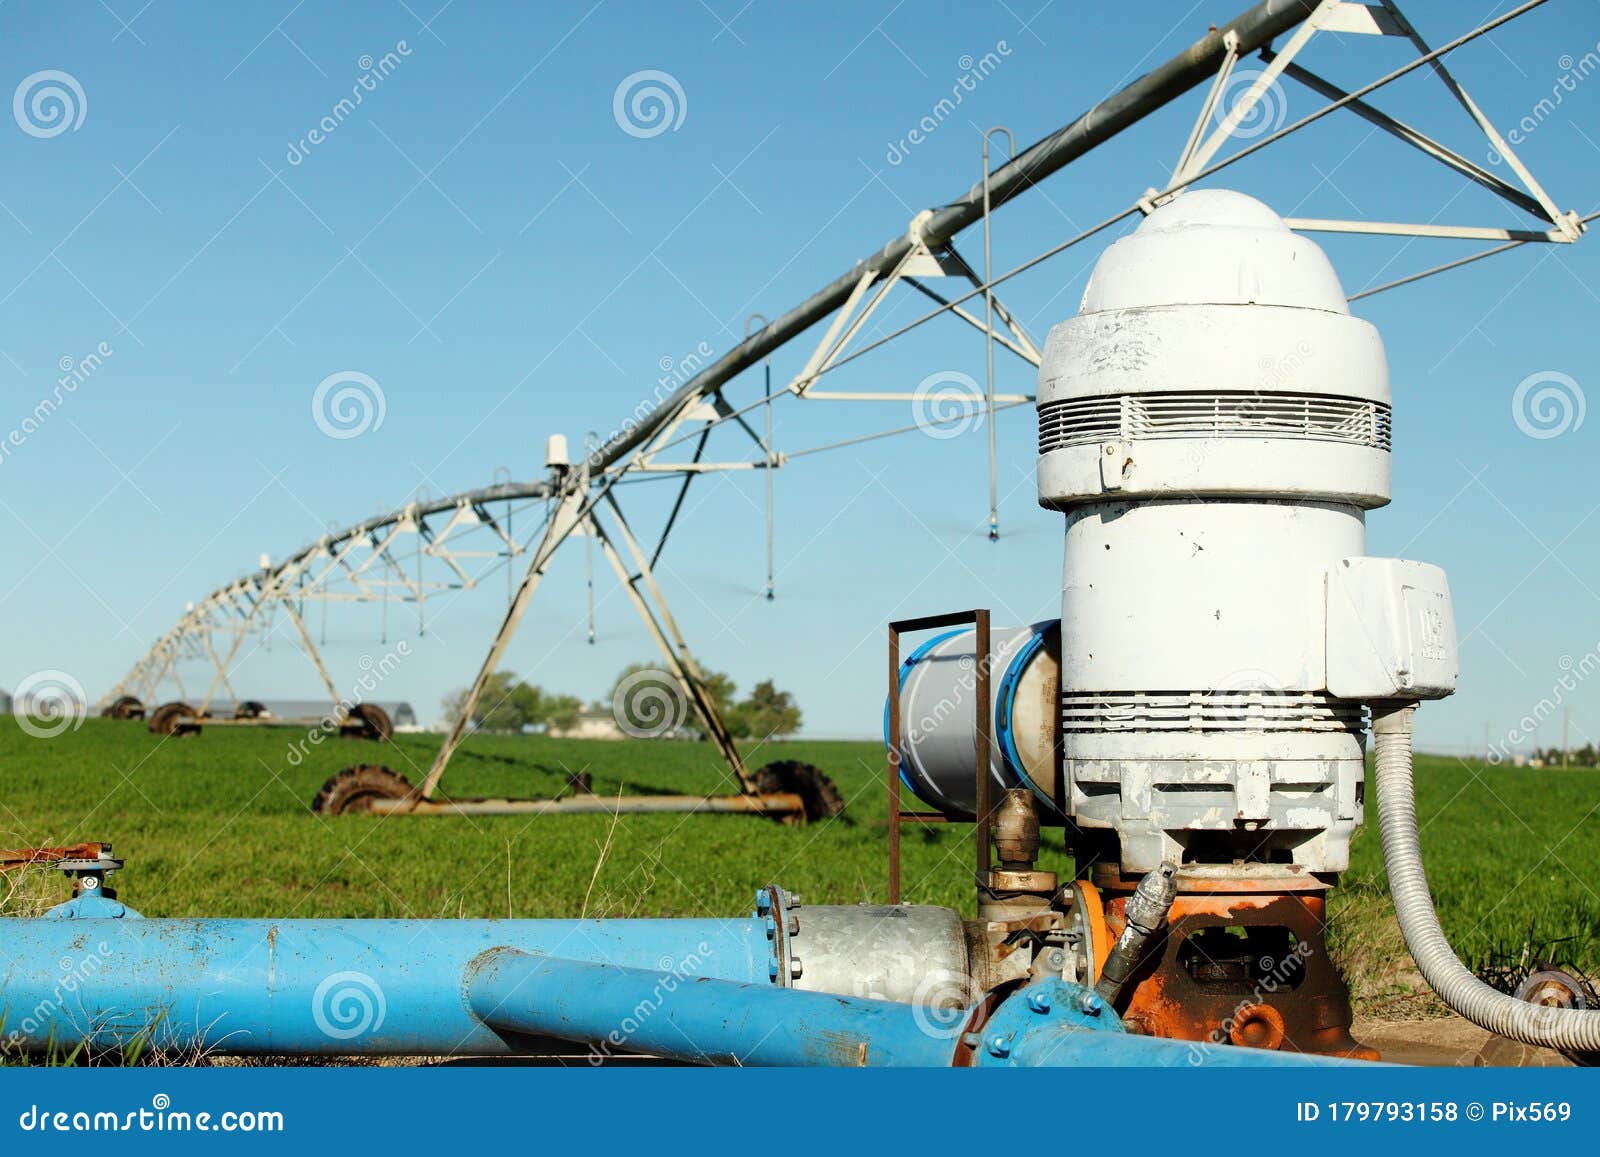 a water pump in an agricultura irrigation system.